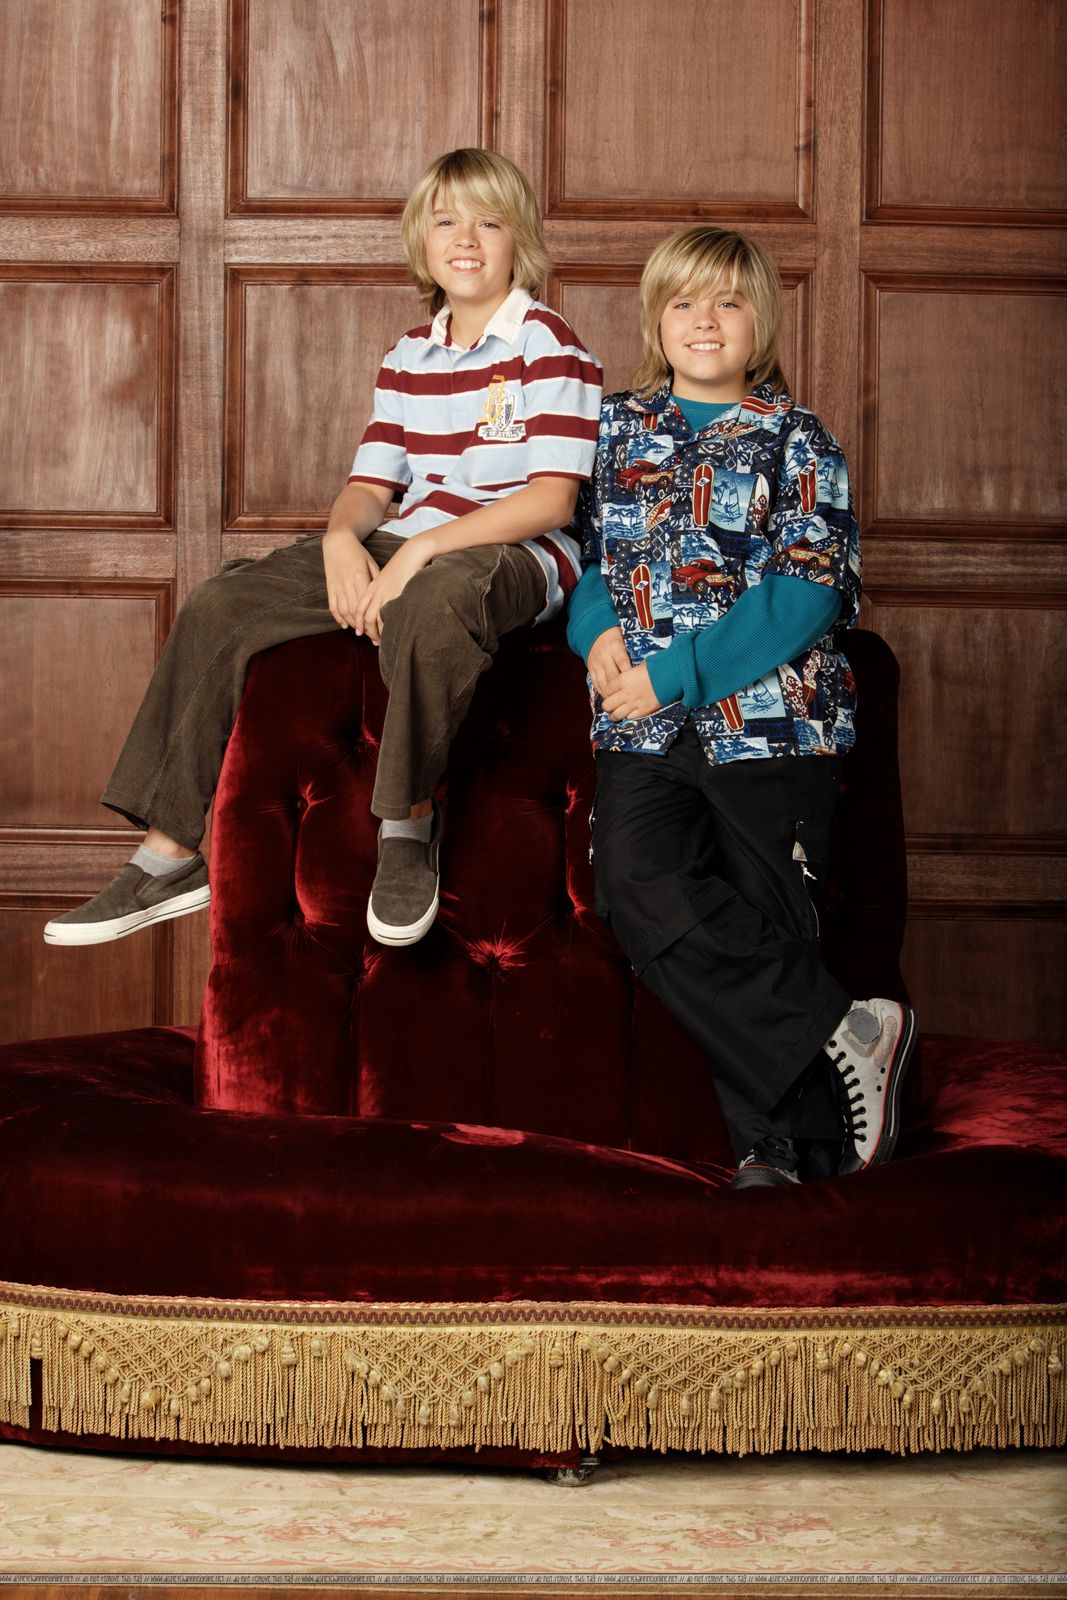 Welcome!: Welcome All Suite Life of Zack and Cody Fans!